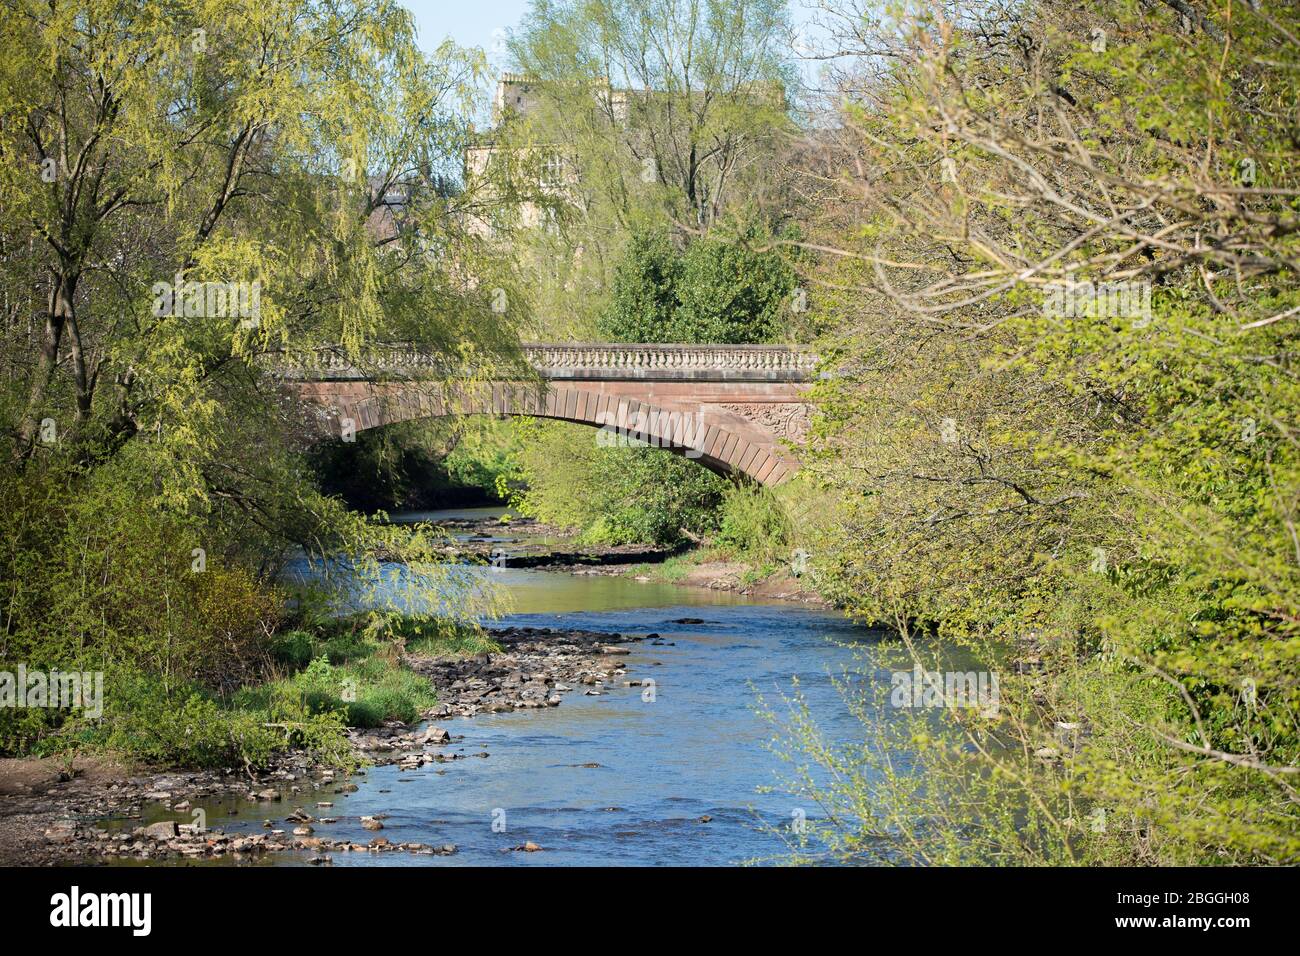 Glasgow, UK. 21st Apr, 2020. Pictured: The River Kelvin seen running through Kelvingrove park. Scenes from Kelvingrove Park in Glasgow during the coronavirus (COVID-19) lockdown. Credit: Colin Fisher/Alamy Live News Stock Photo